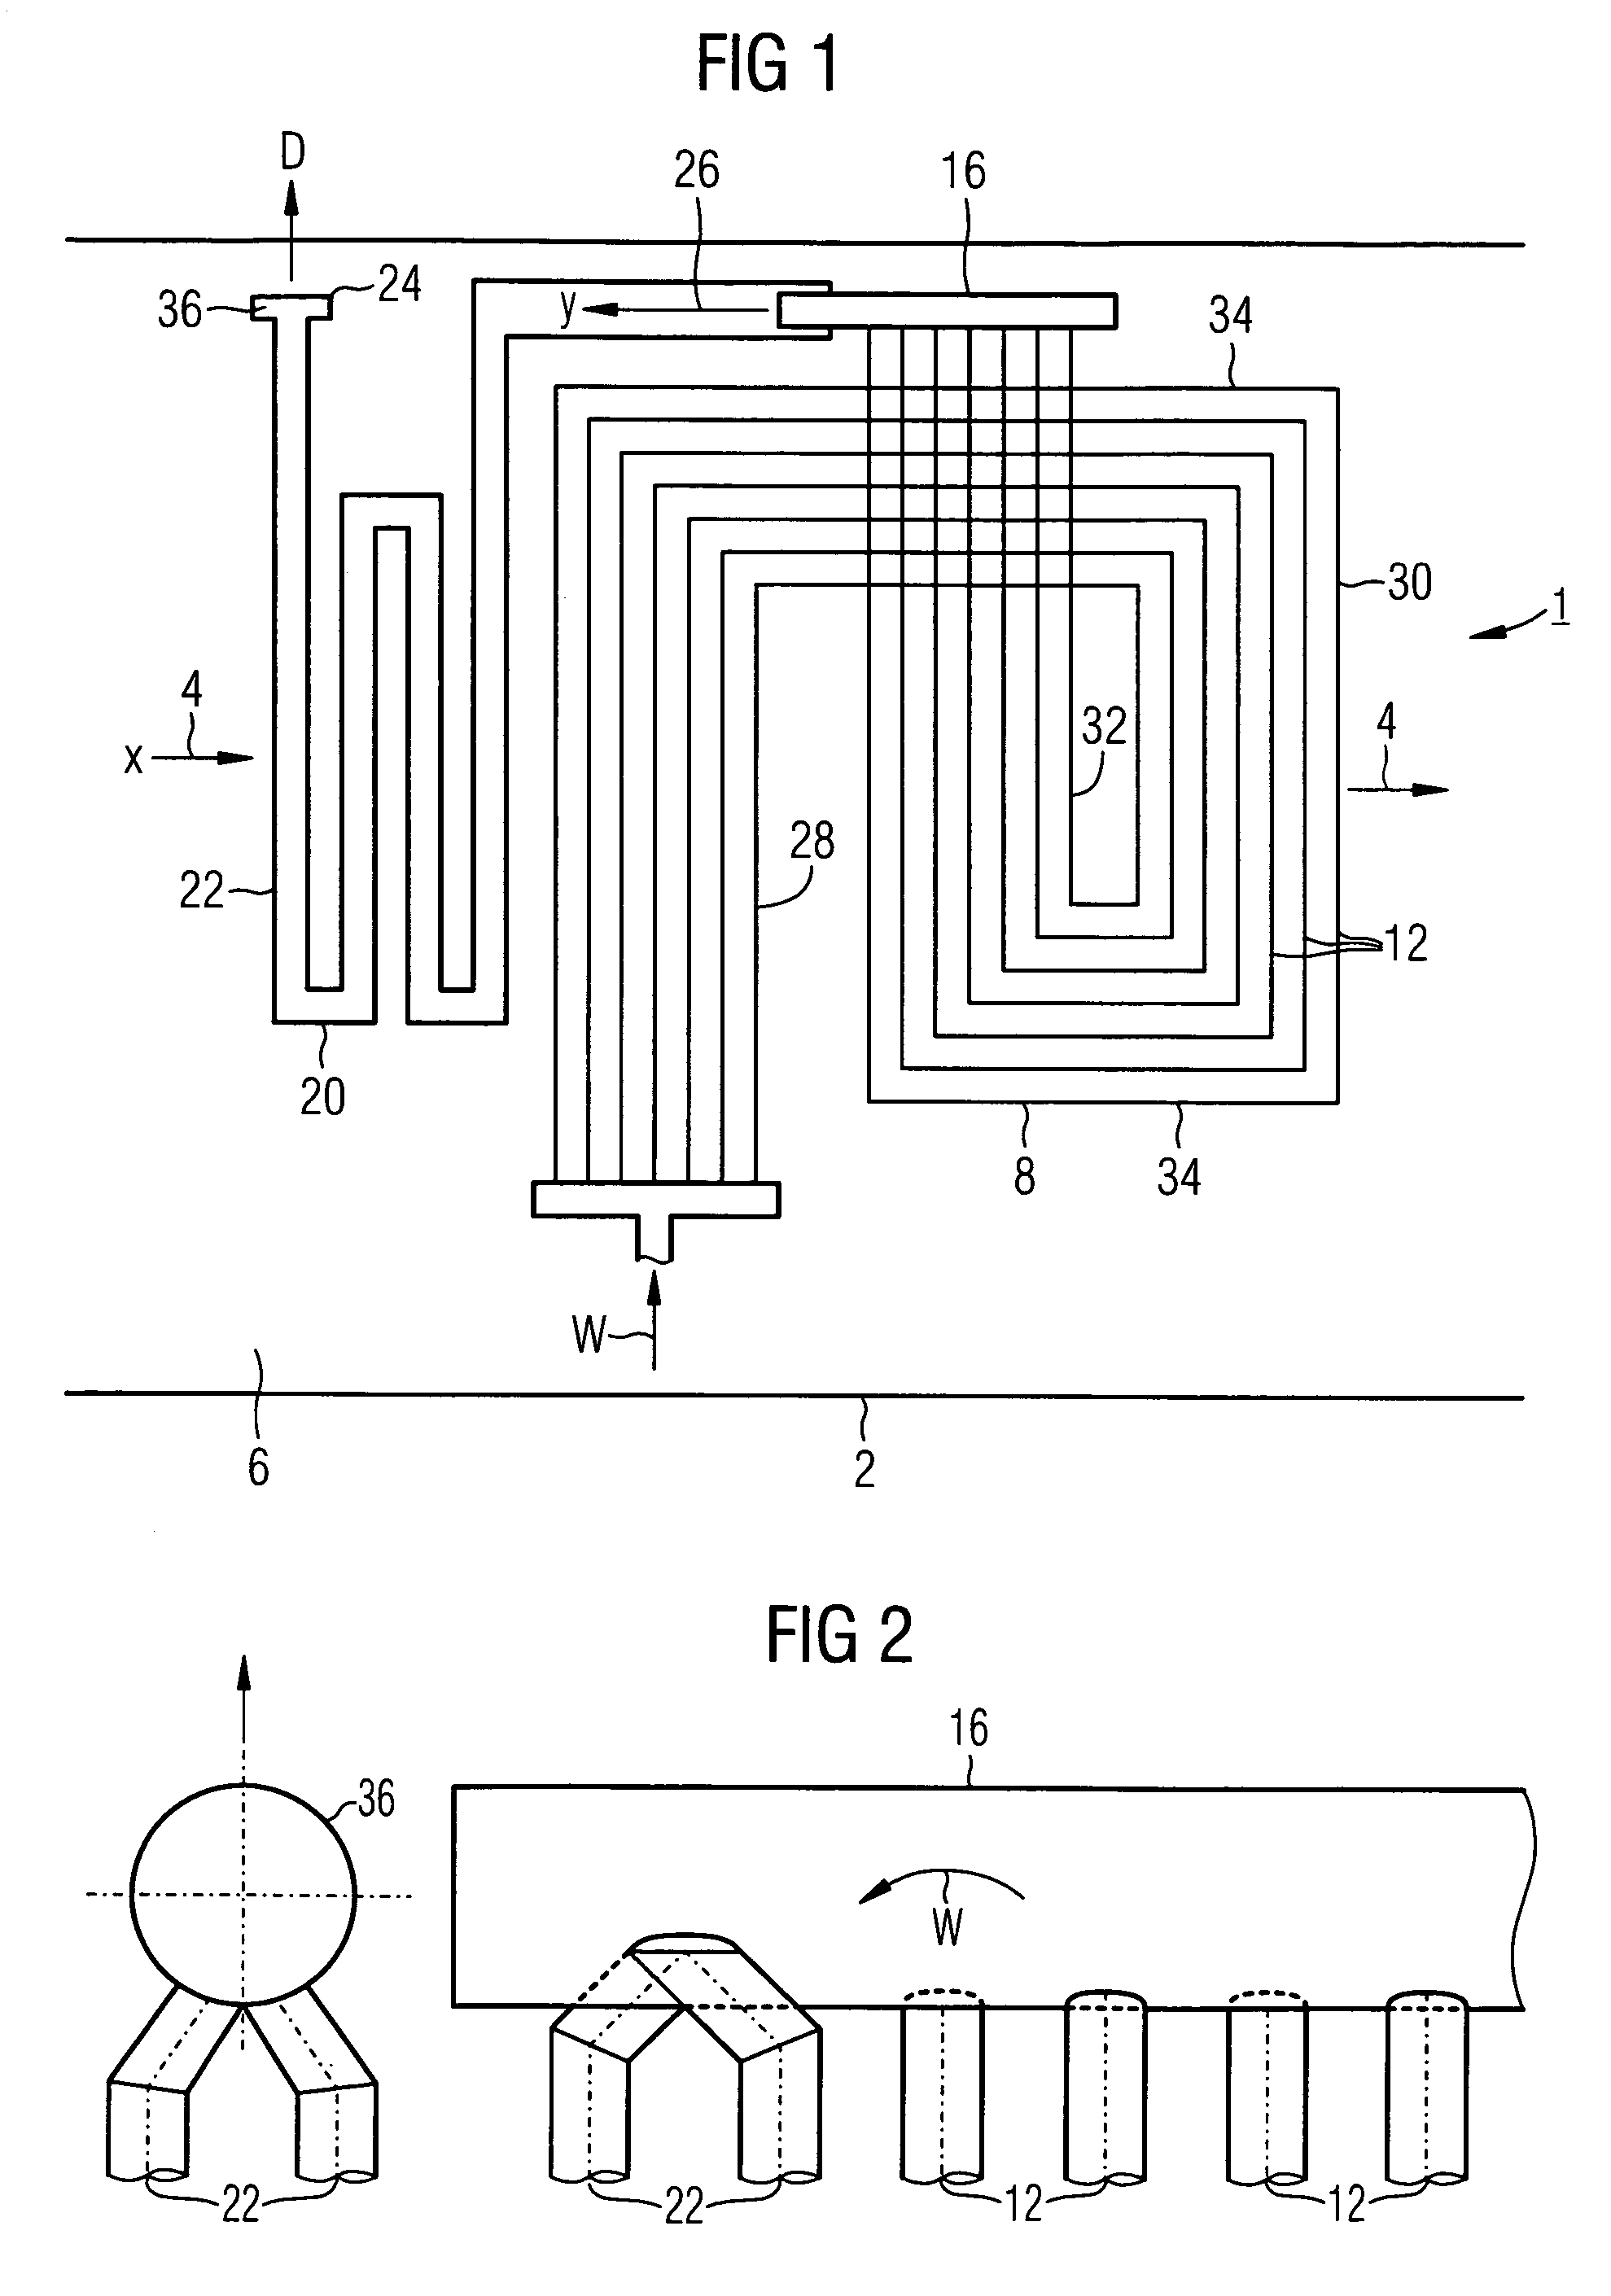 Method for starting a continuous steam generator and continuous steam generator for carrying out said method